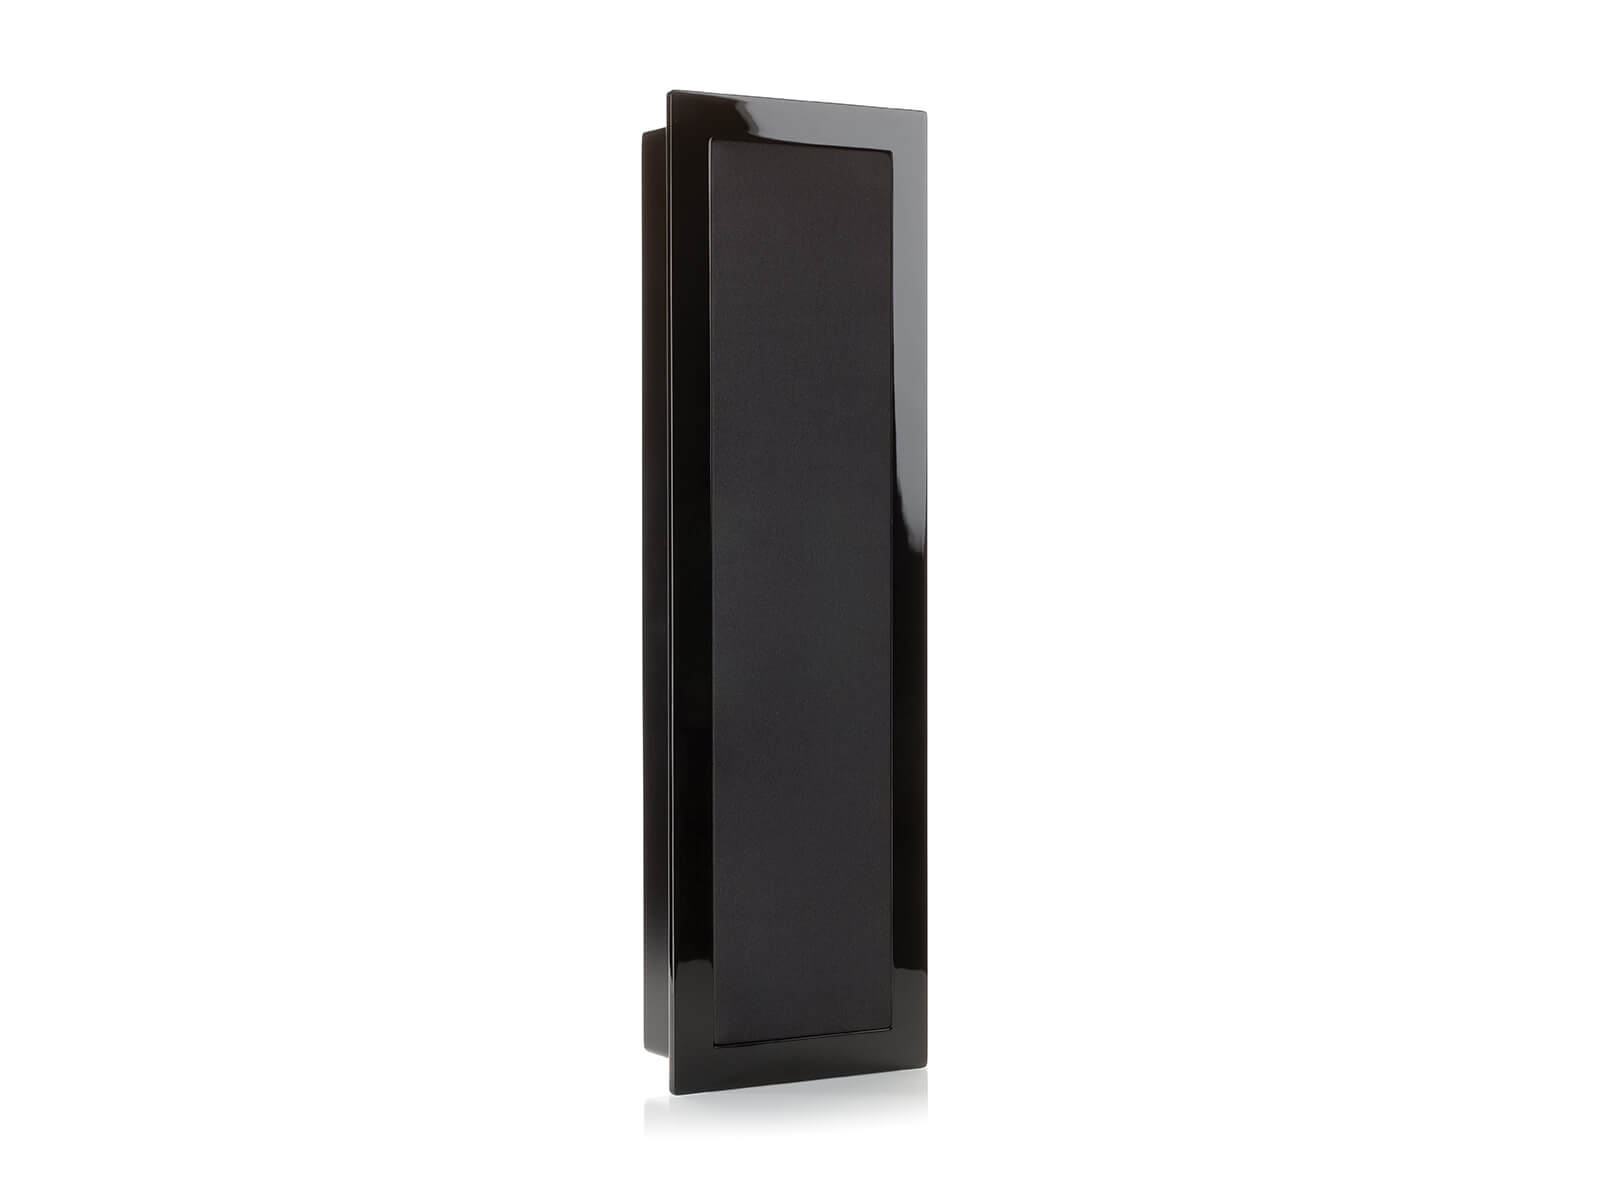 SoundFrame SF2, on-wall speakers, with a high gloss black lacquer finish.